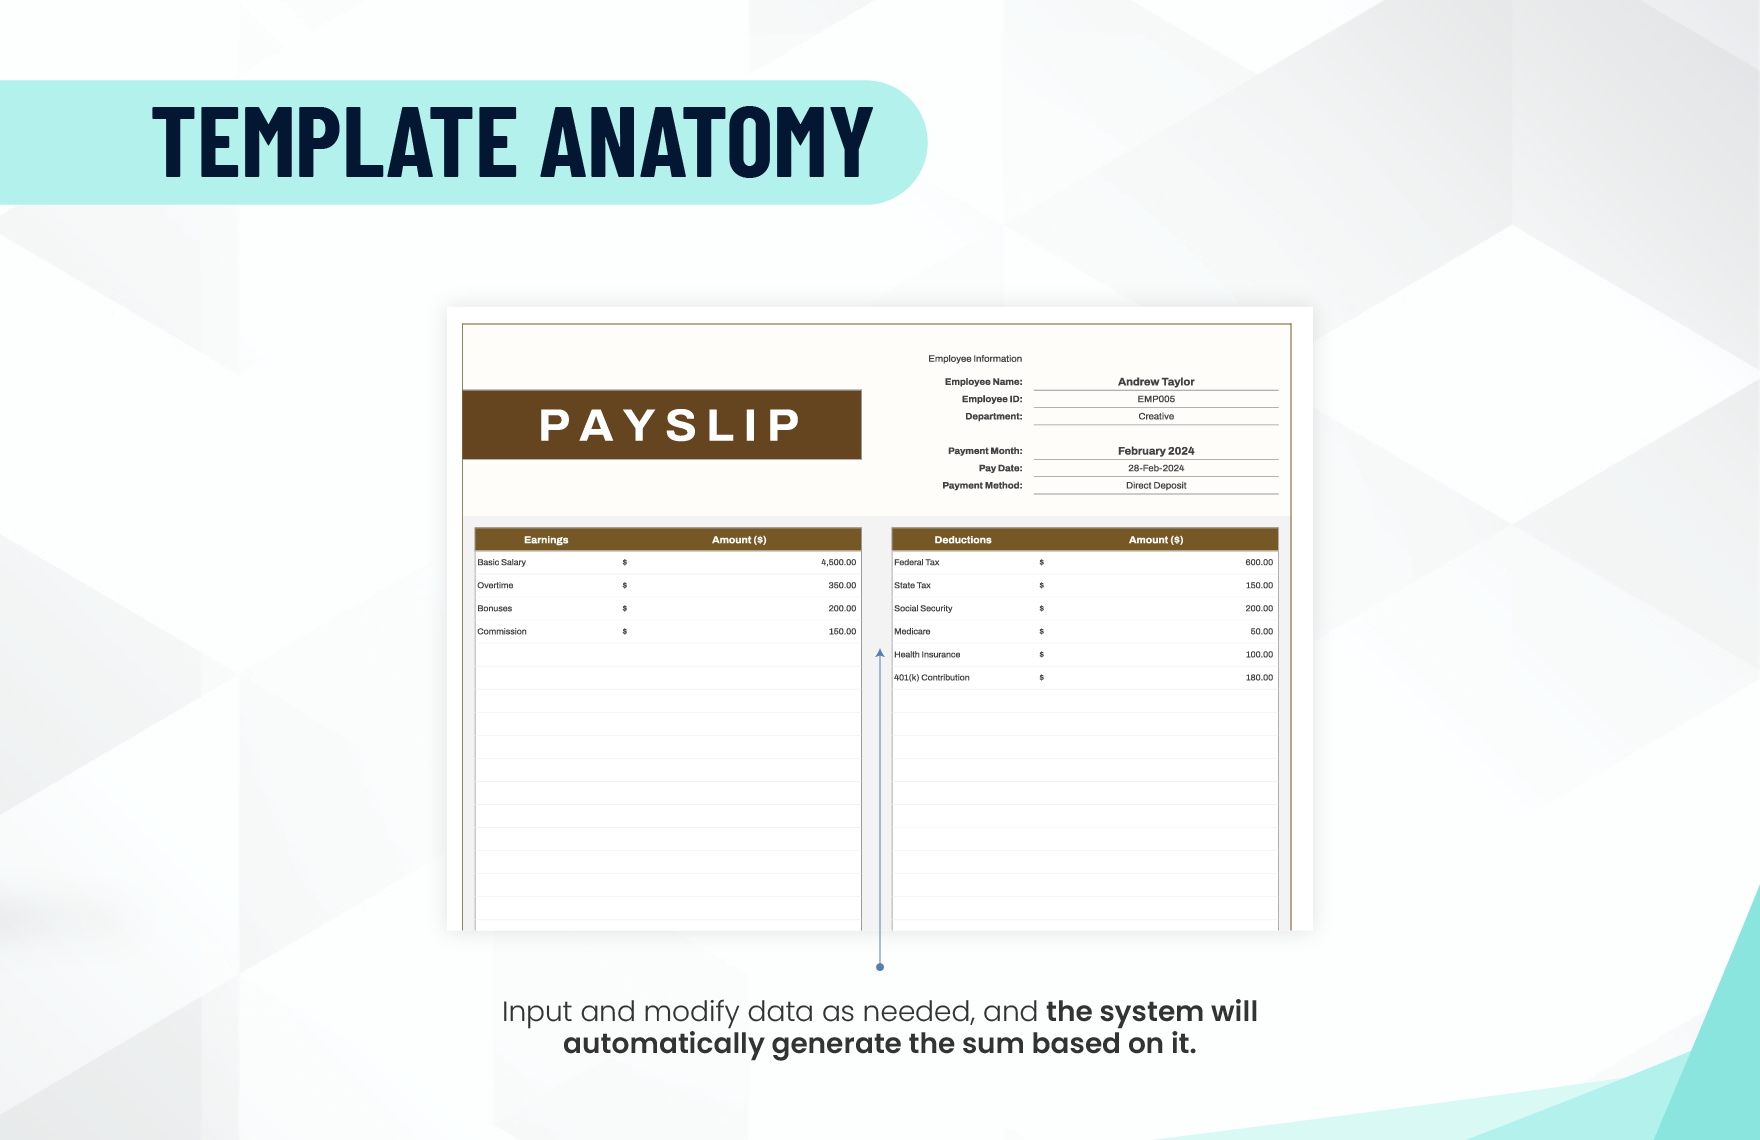 Monthly Payslip Template